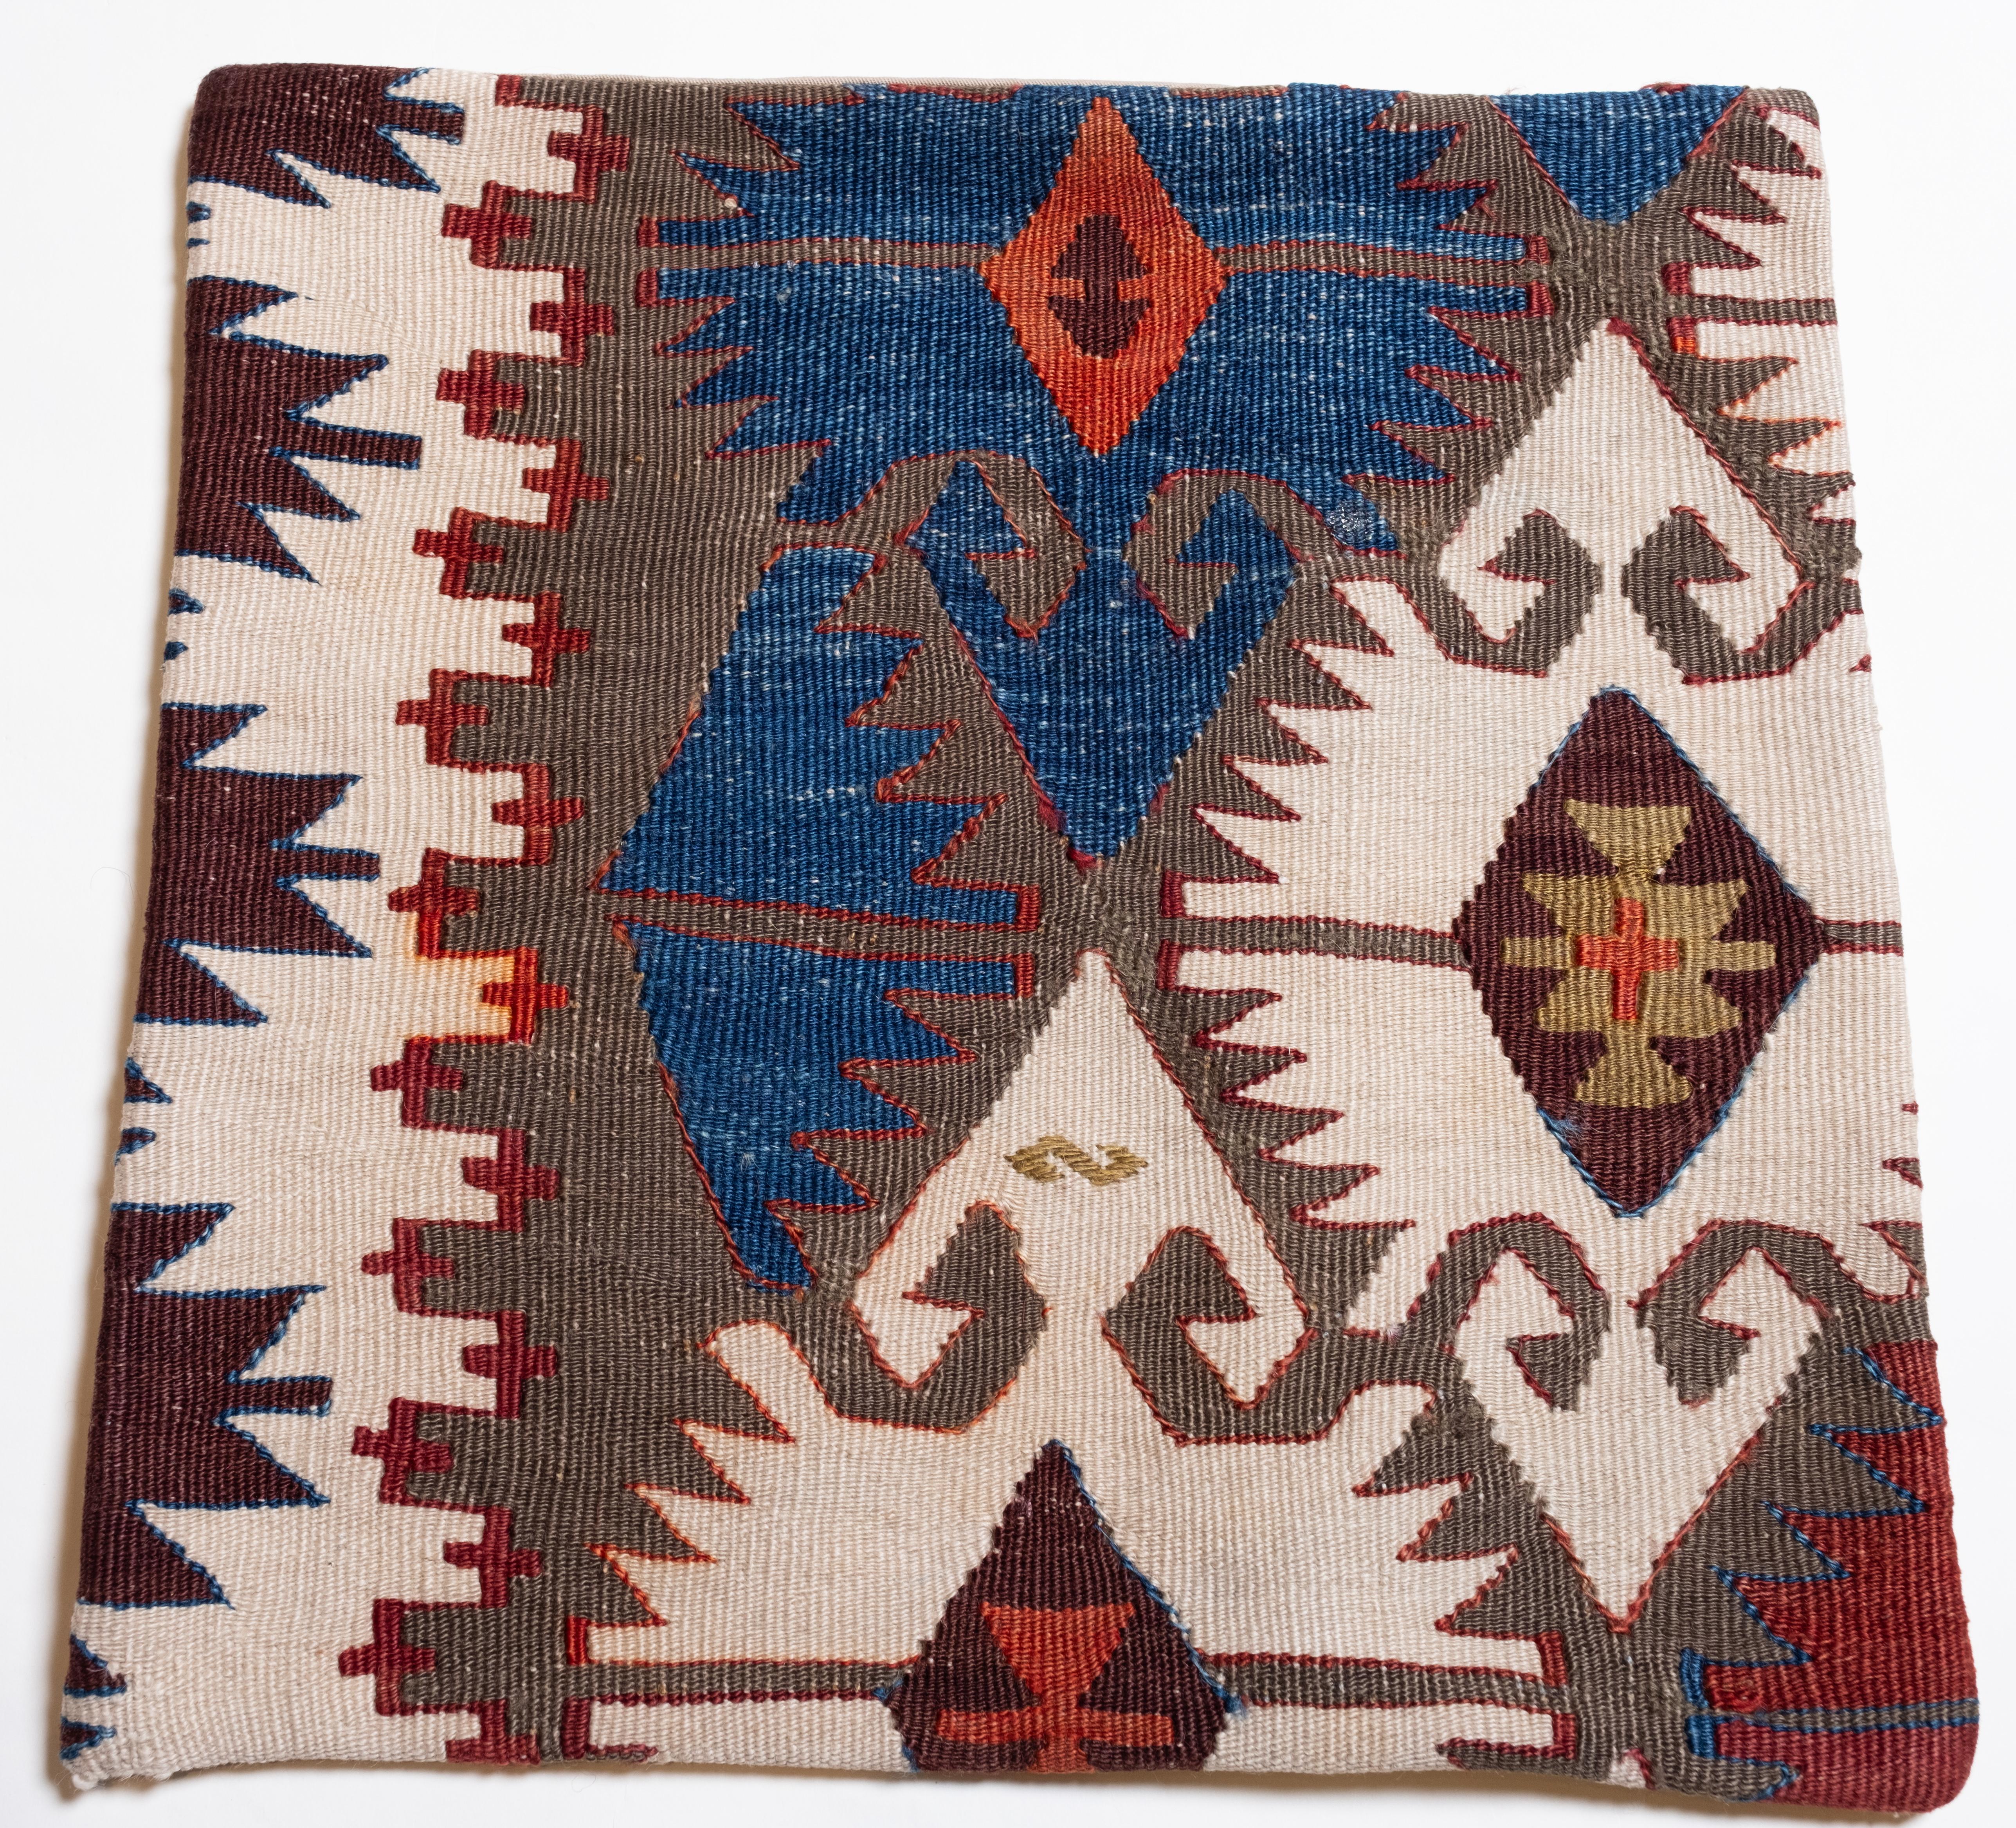 We made a cushion cover using the undamaged parts of the precious and high-quality old & antique kilims that cannot be repaired. Like a painting, a part of the scenery is cut out from a kilim, and even several covers cut out from the same kilim show